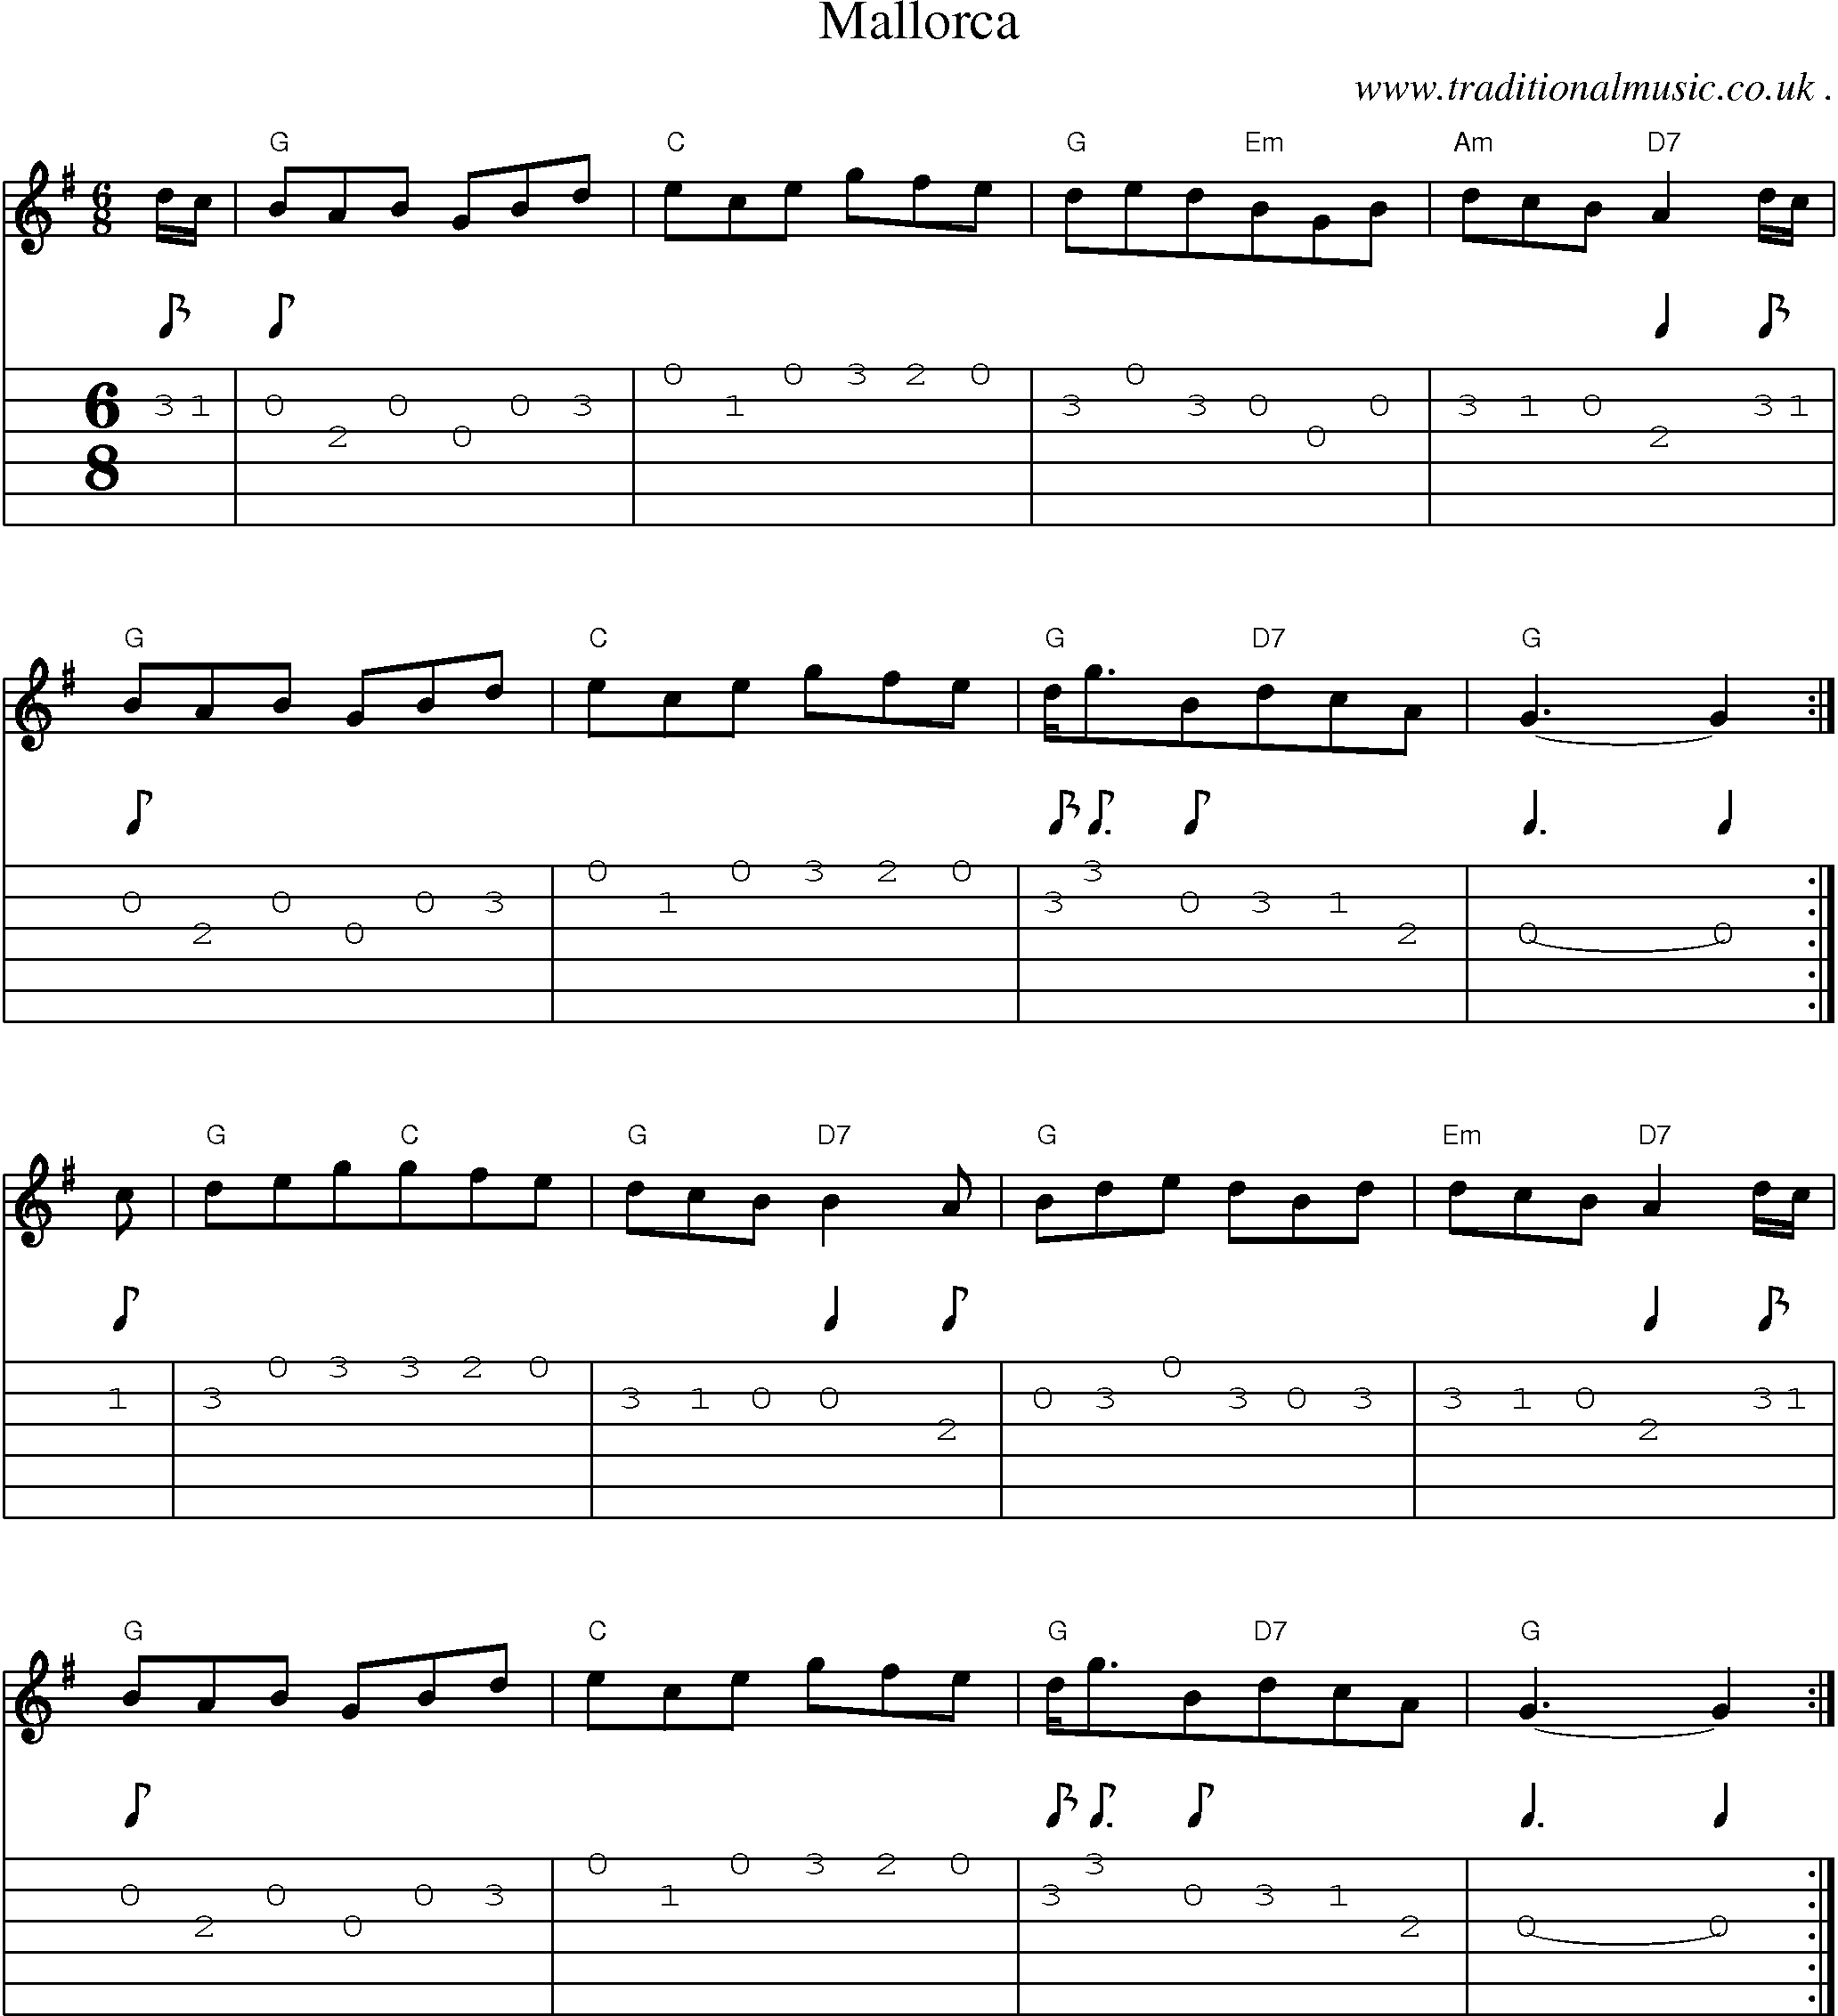 Sheet-Music and Guitar Tabs for Mallorca